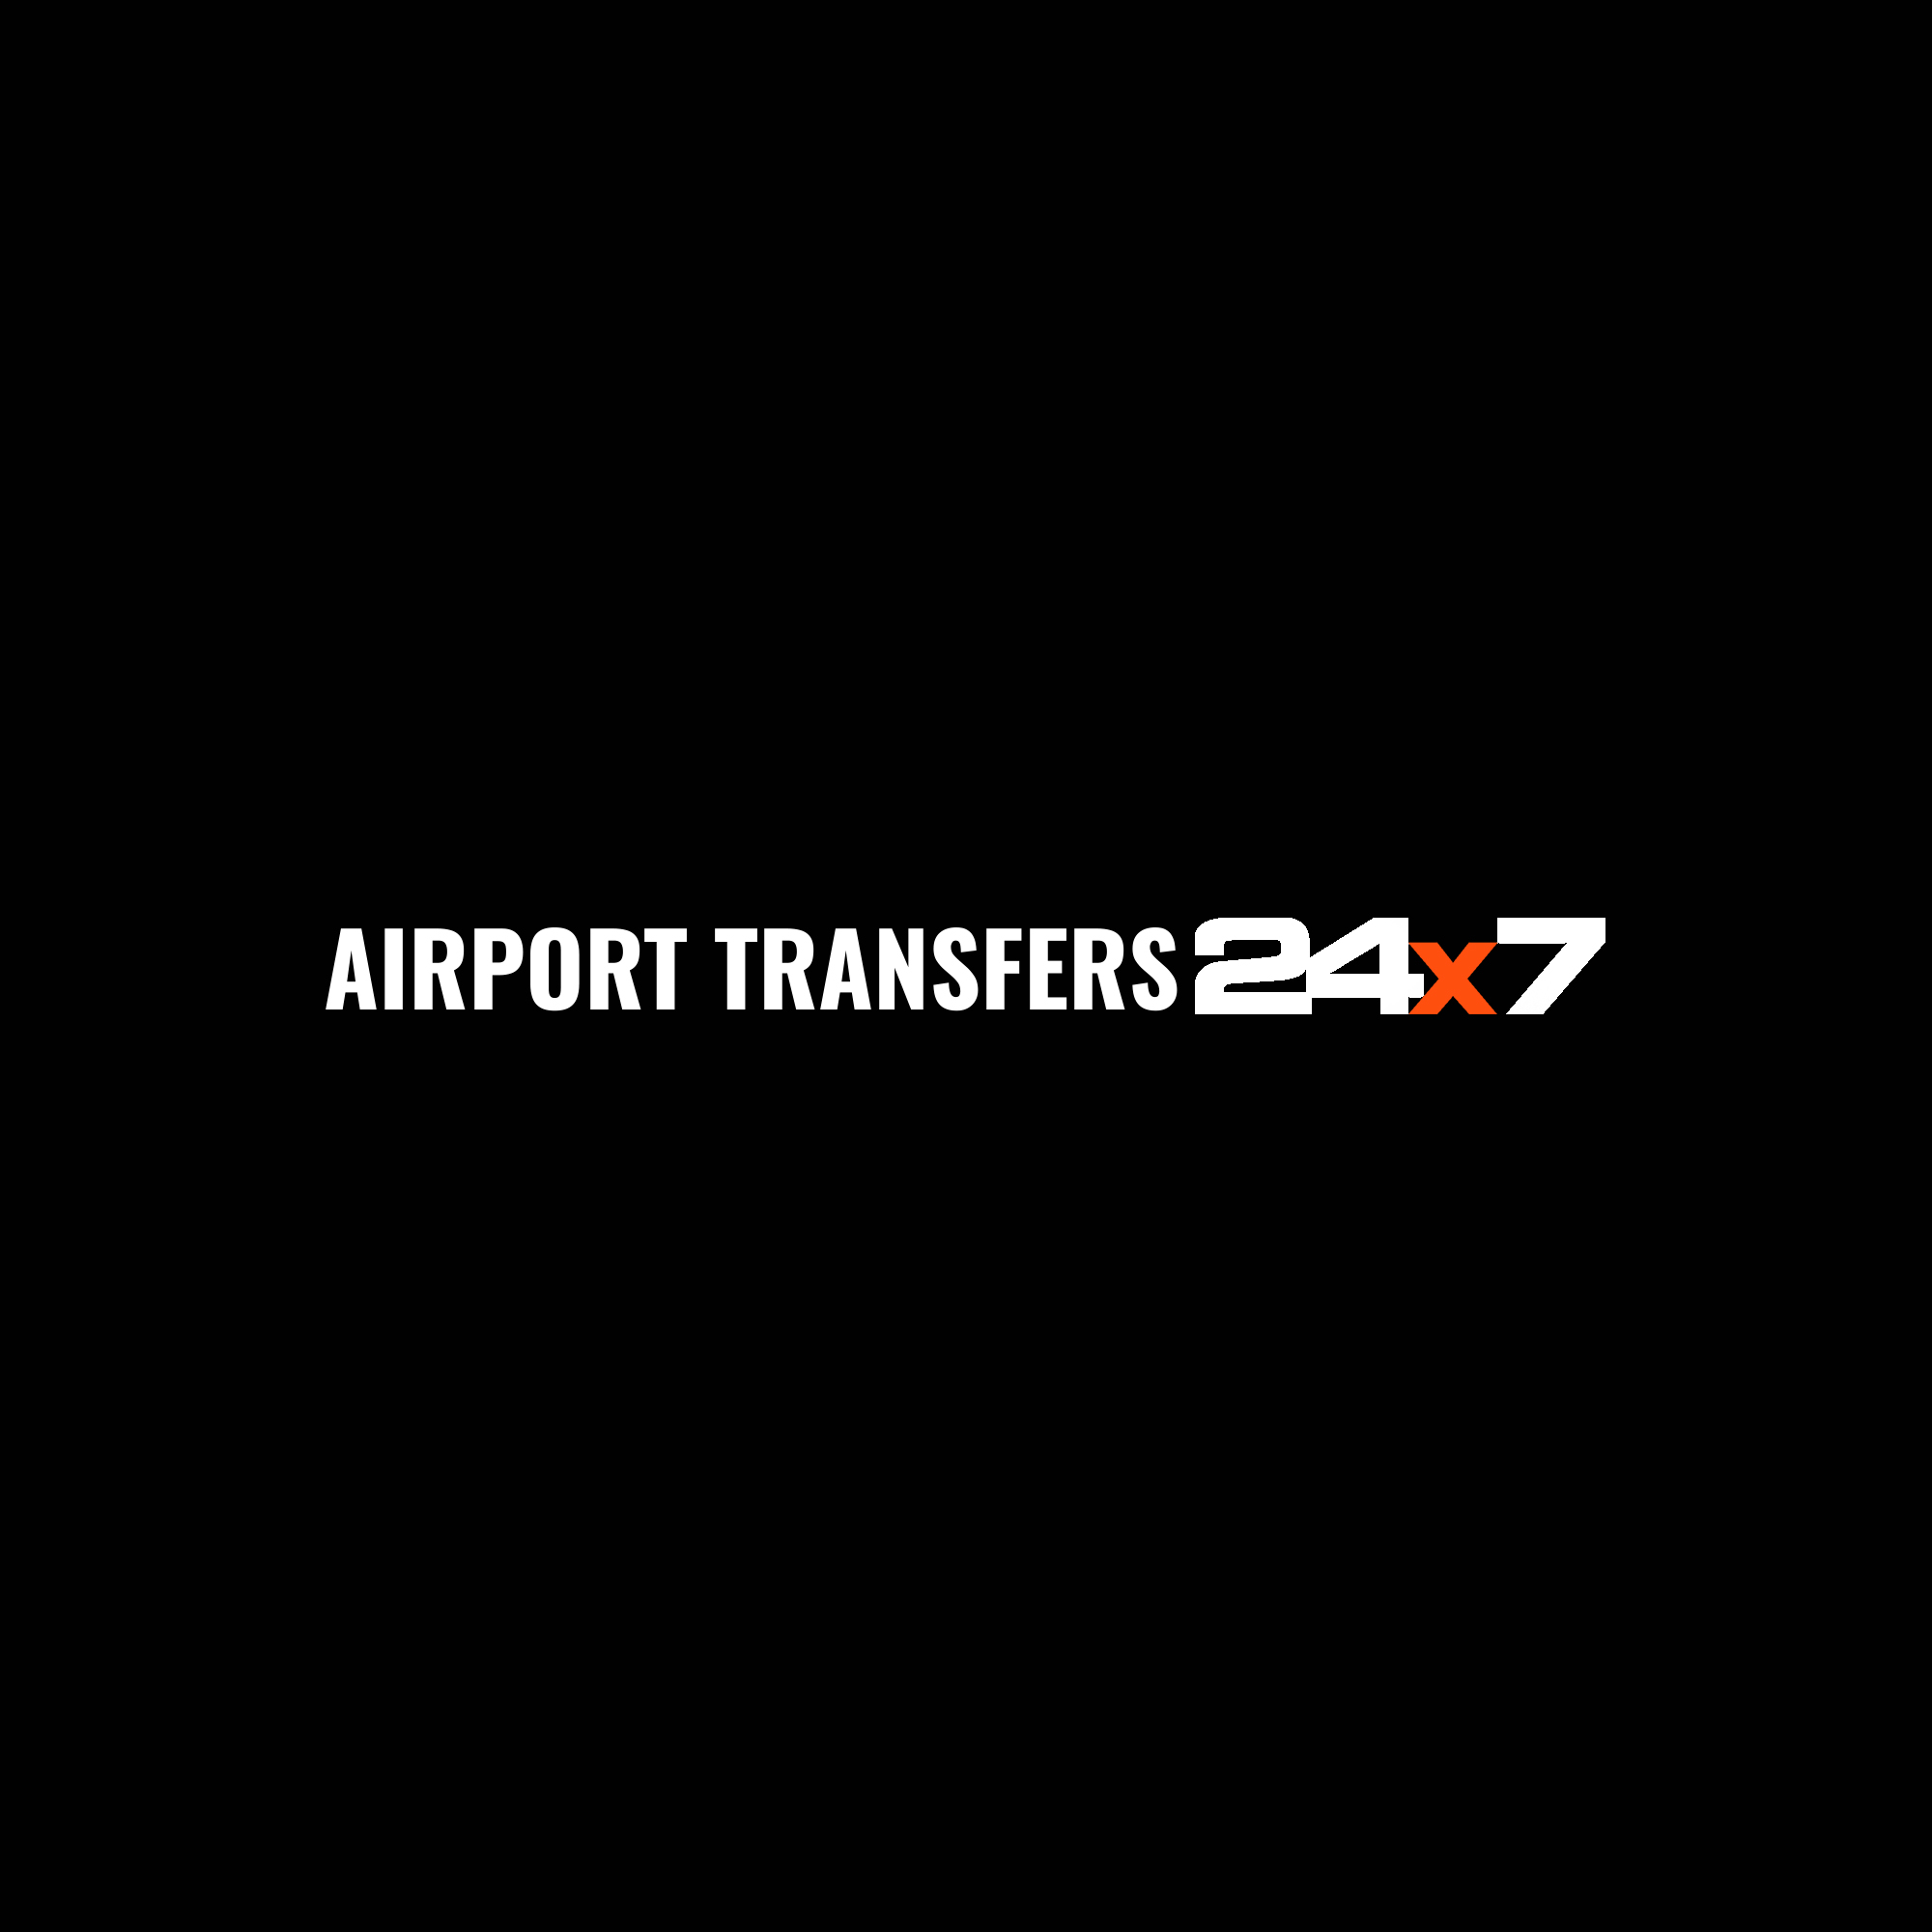 Airport Transfers 247